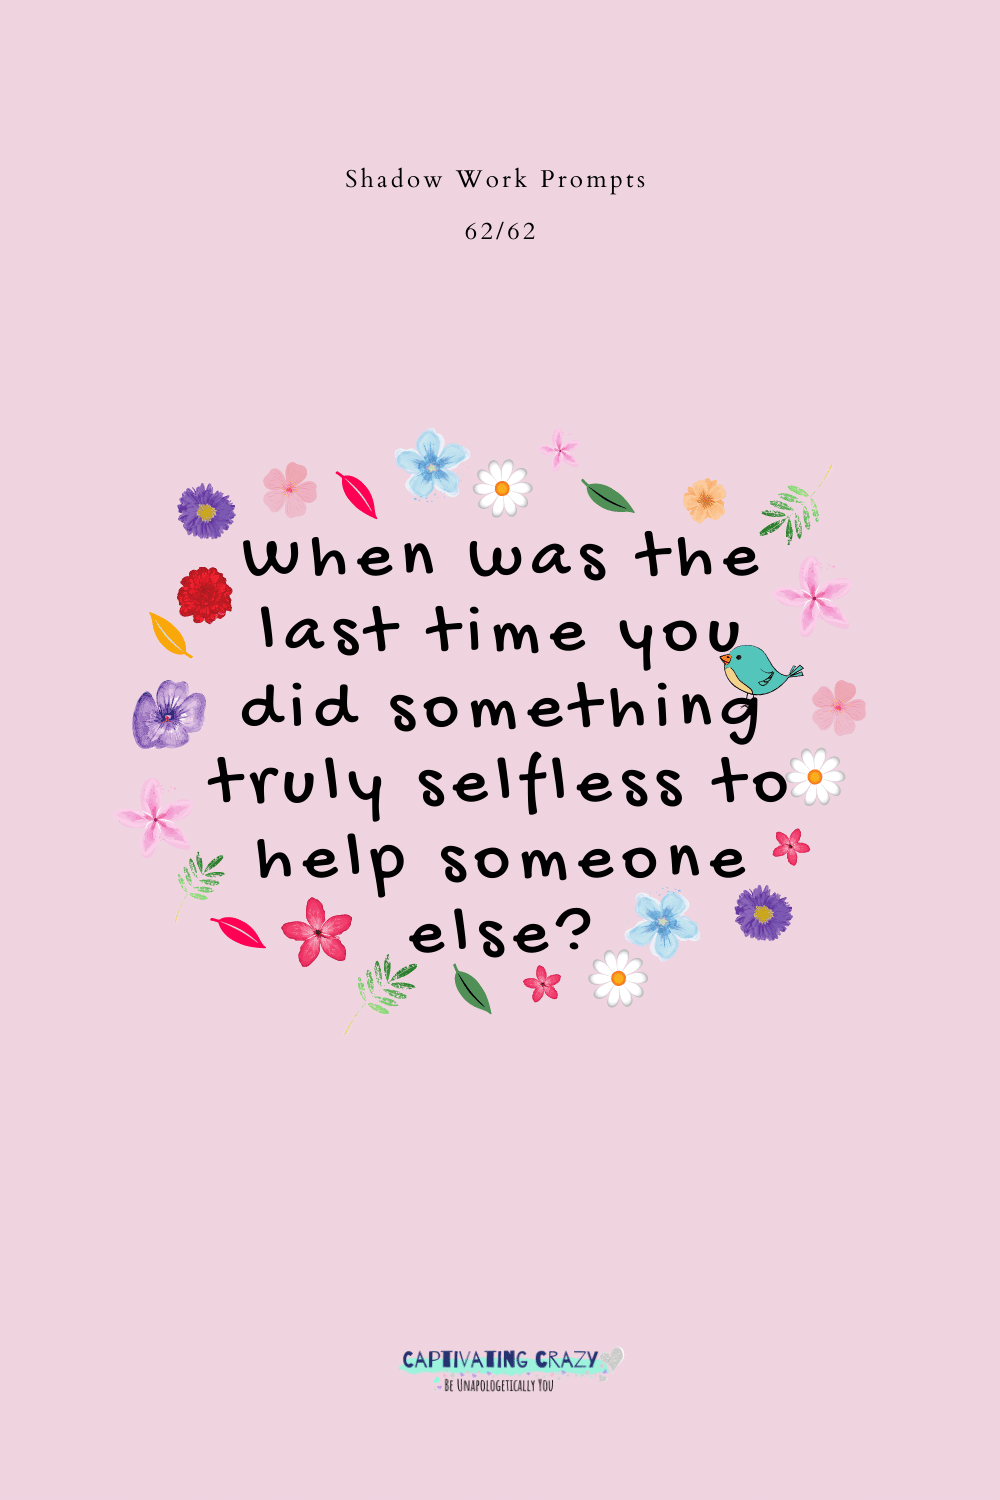 When was the last time you did something truly selfless to help someone else?